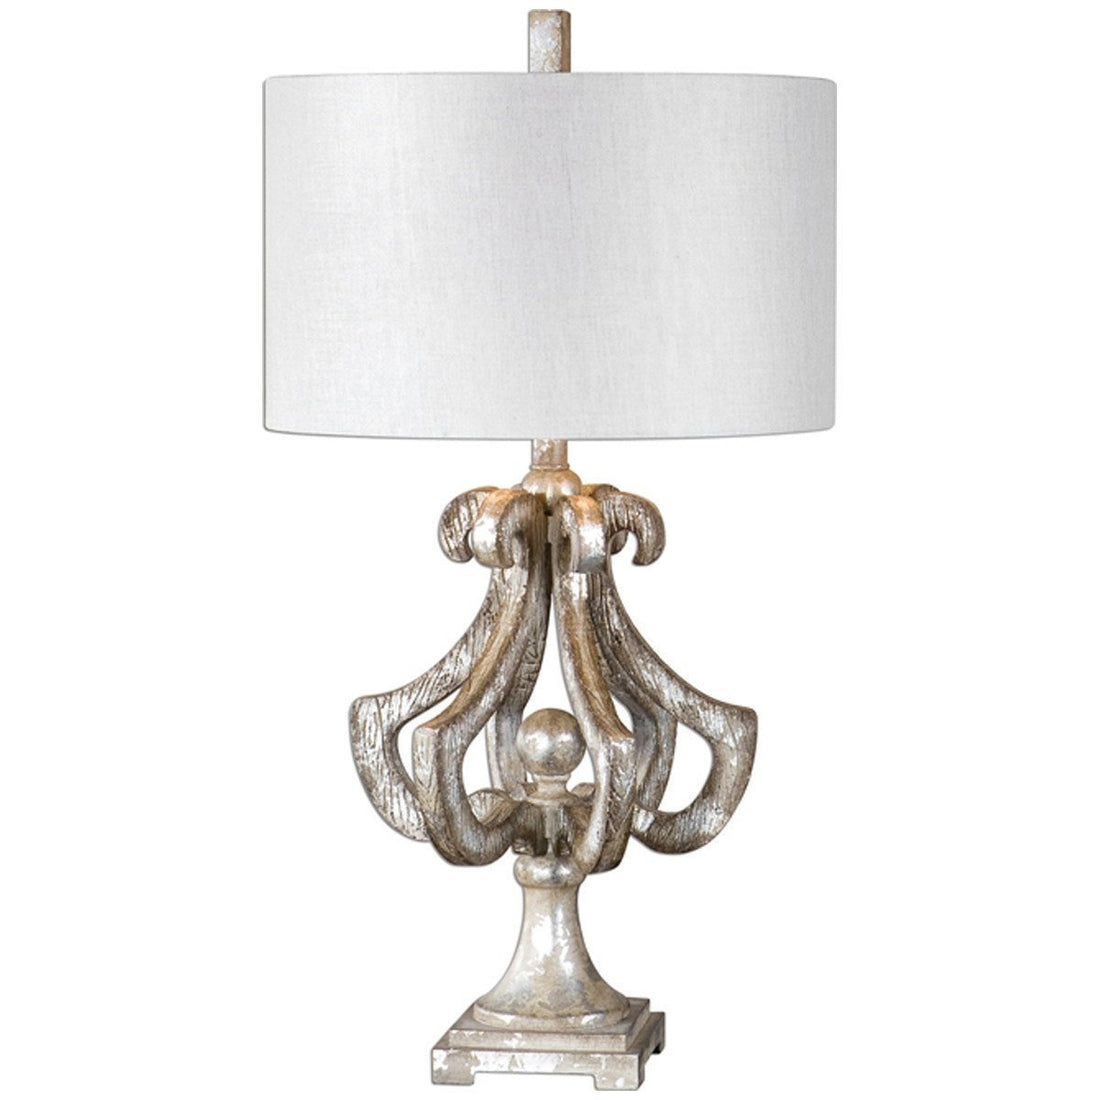 Uttermost Vinadio Distressed Silver Table Lamp